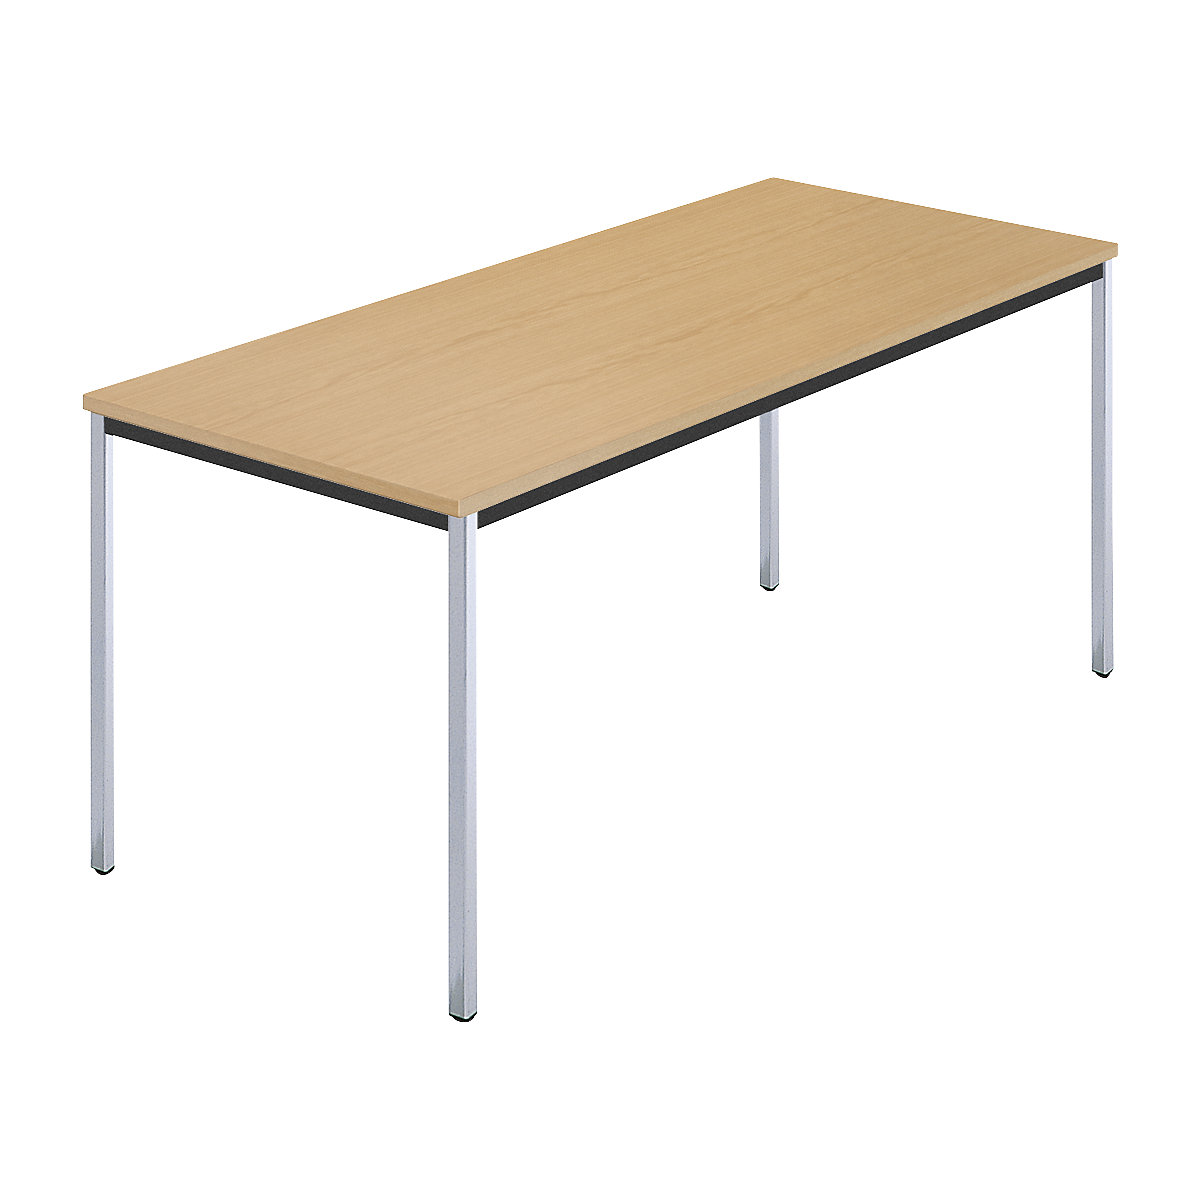 Rectangular table, square tubular steel chrome plated, WxD 1600 x 800 mm, natural beech finish-6